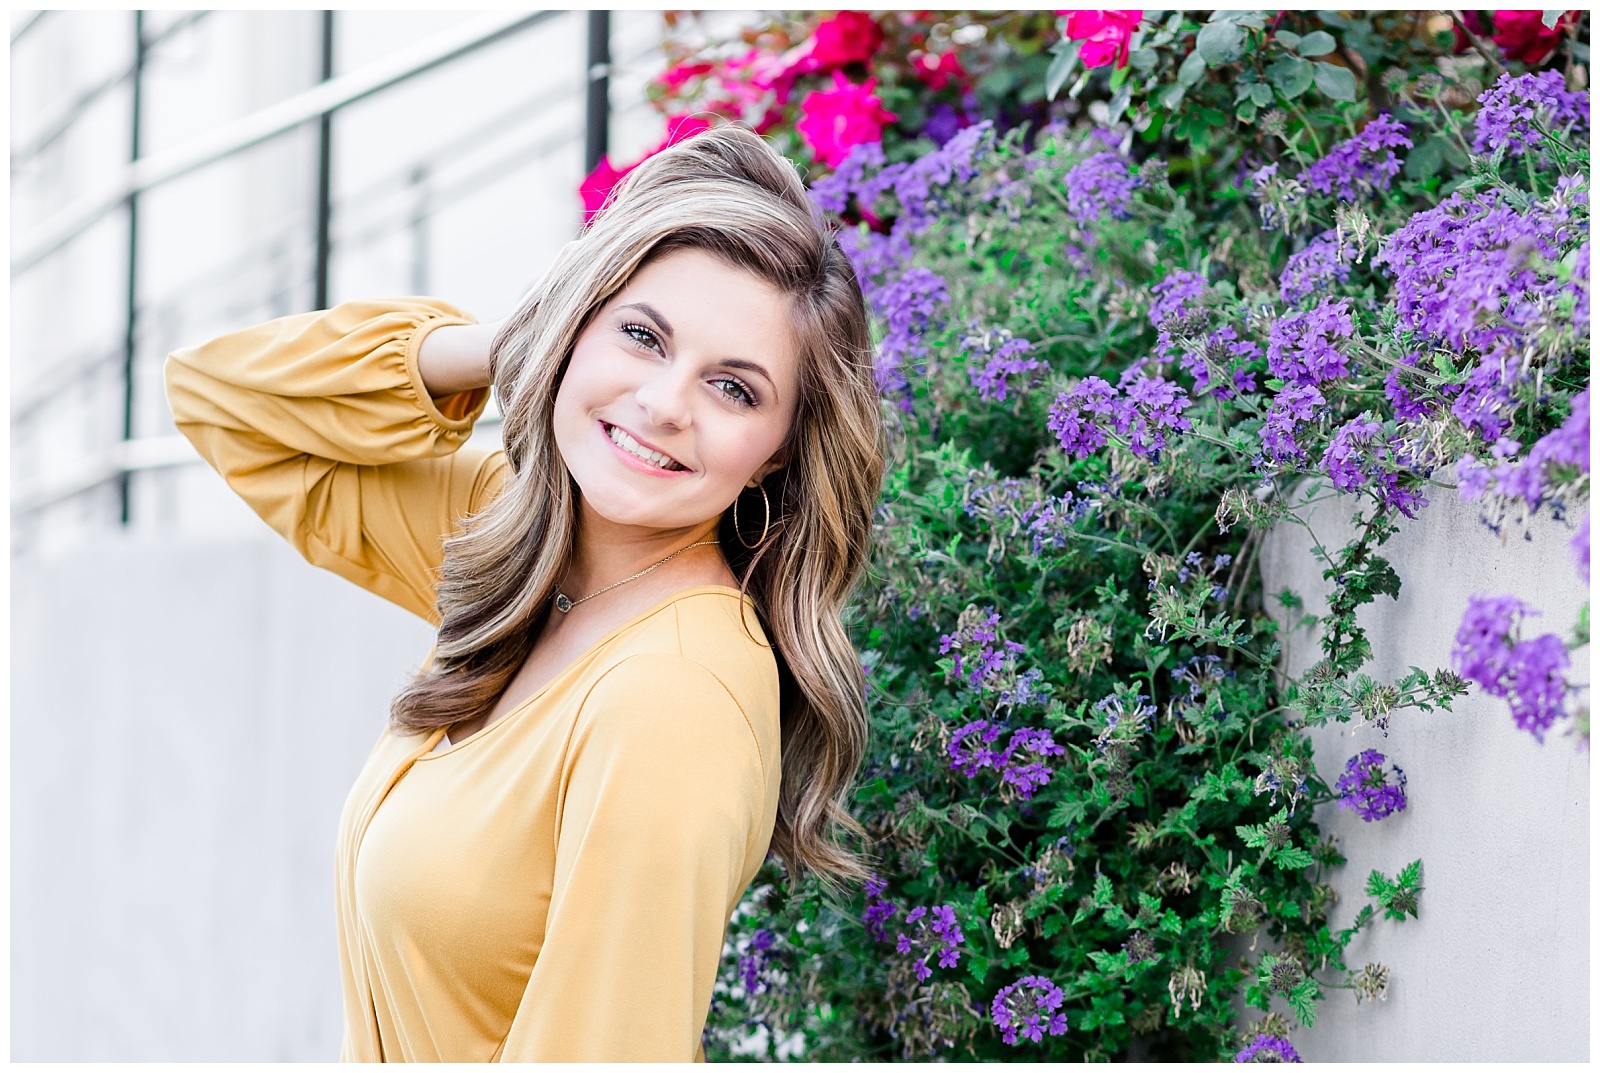 Downtown city senior portrait session in white jeans and a mustard yellow top with a marble building and flowers